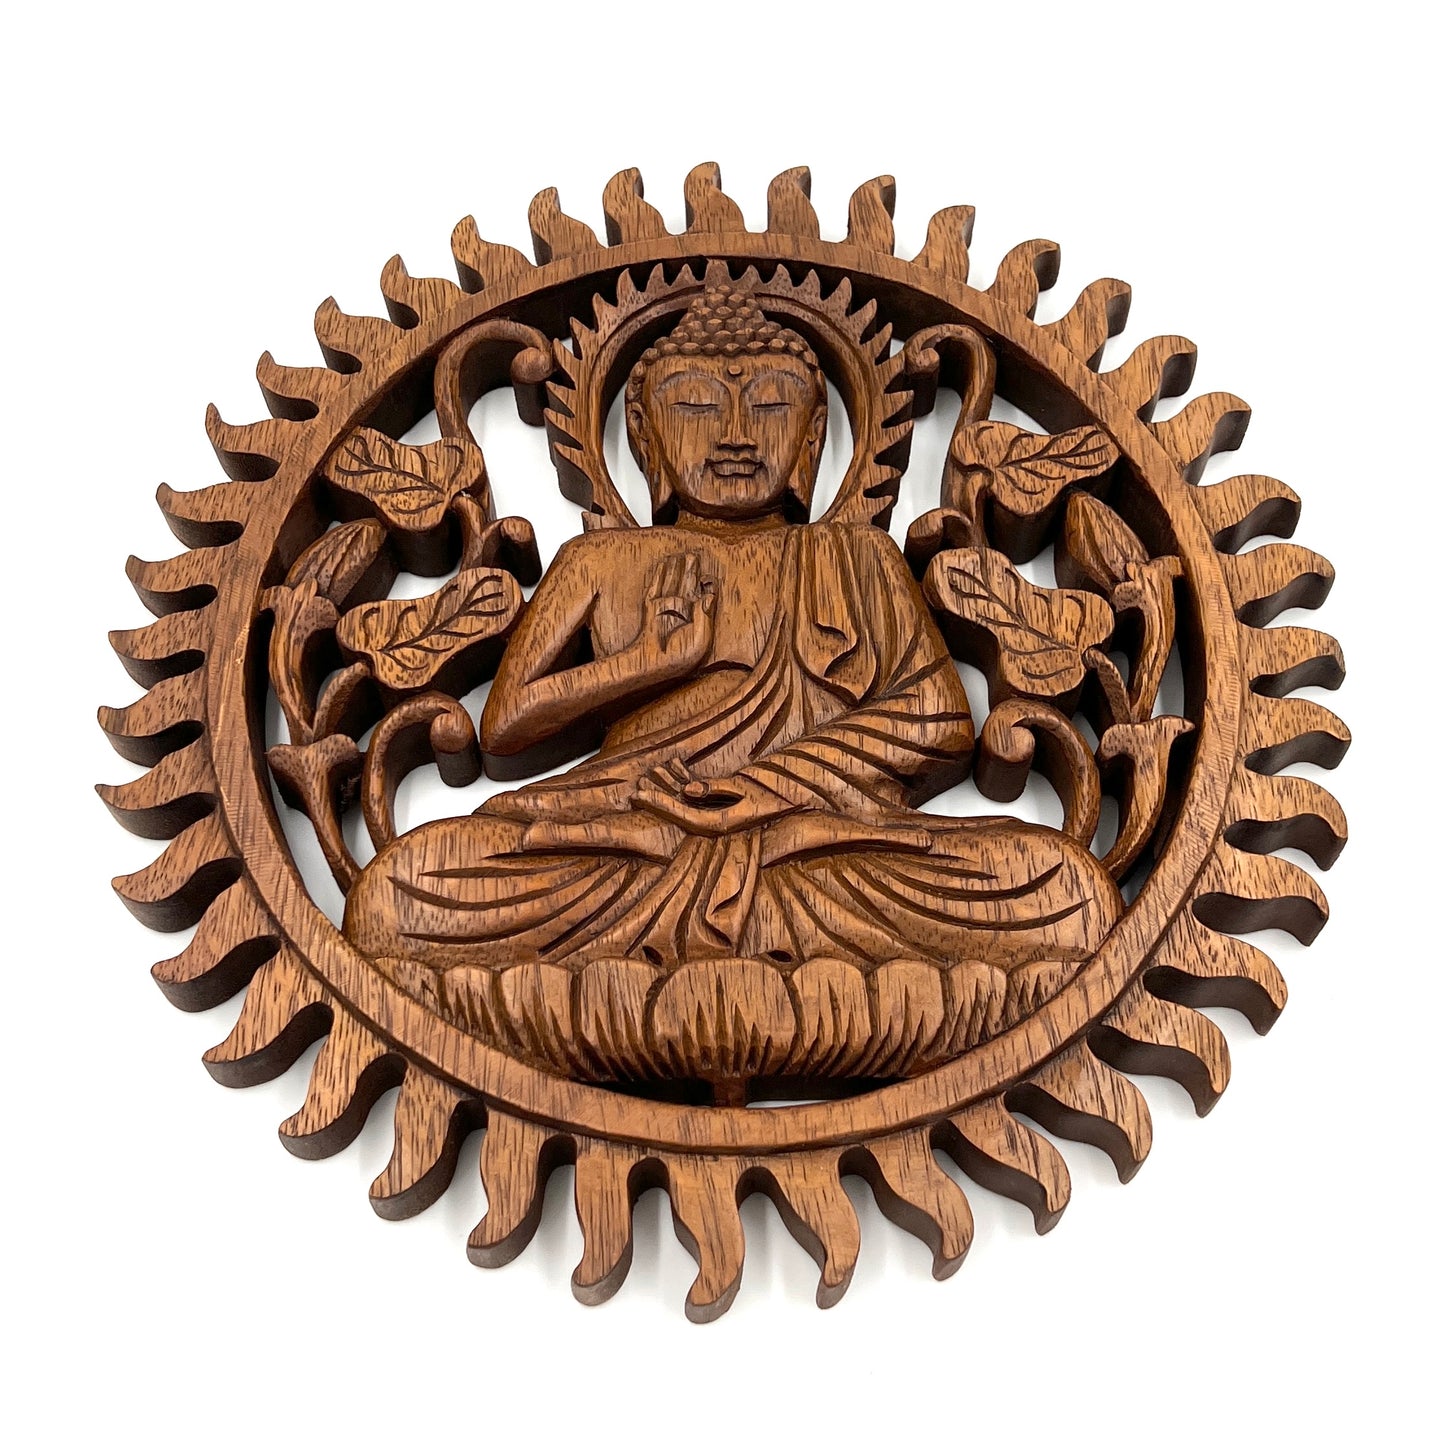 Buddha Flamed Panel Carving